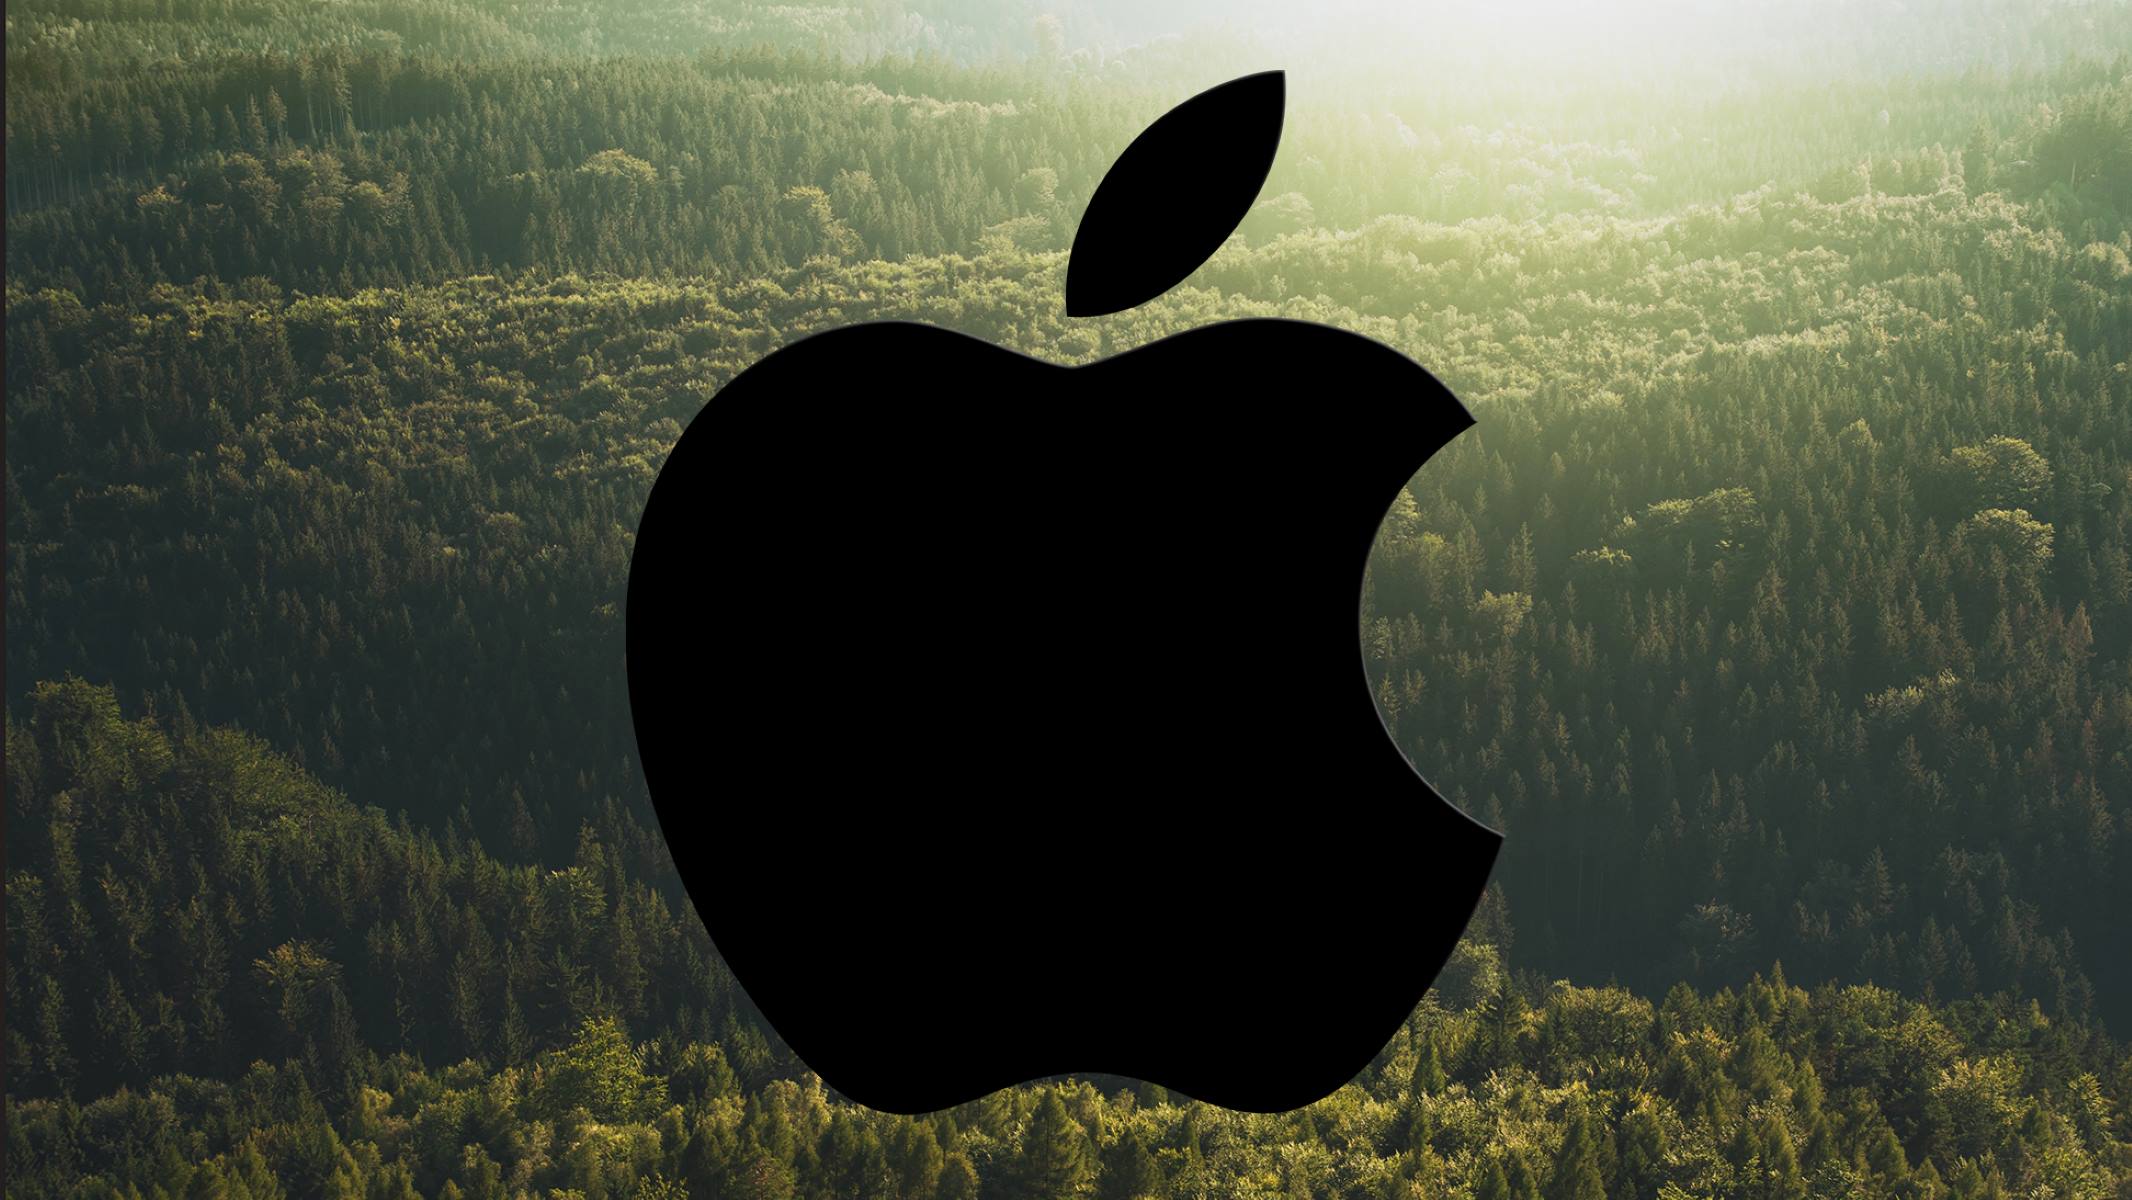 apples-environmental-commitments-is-it-all-hype-or-reality